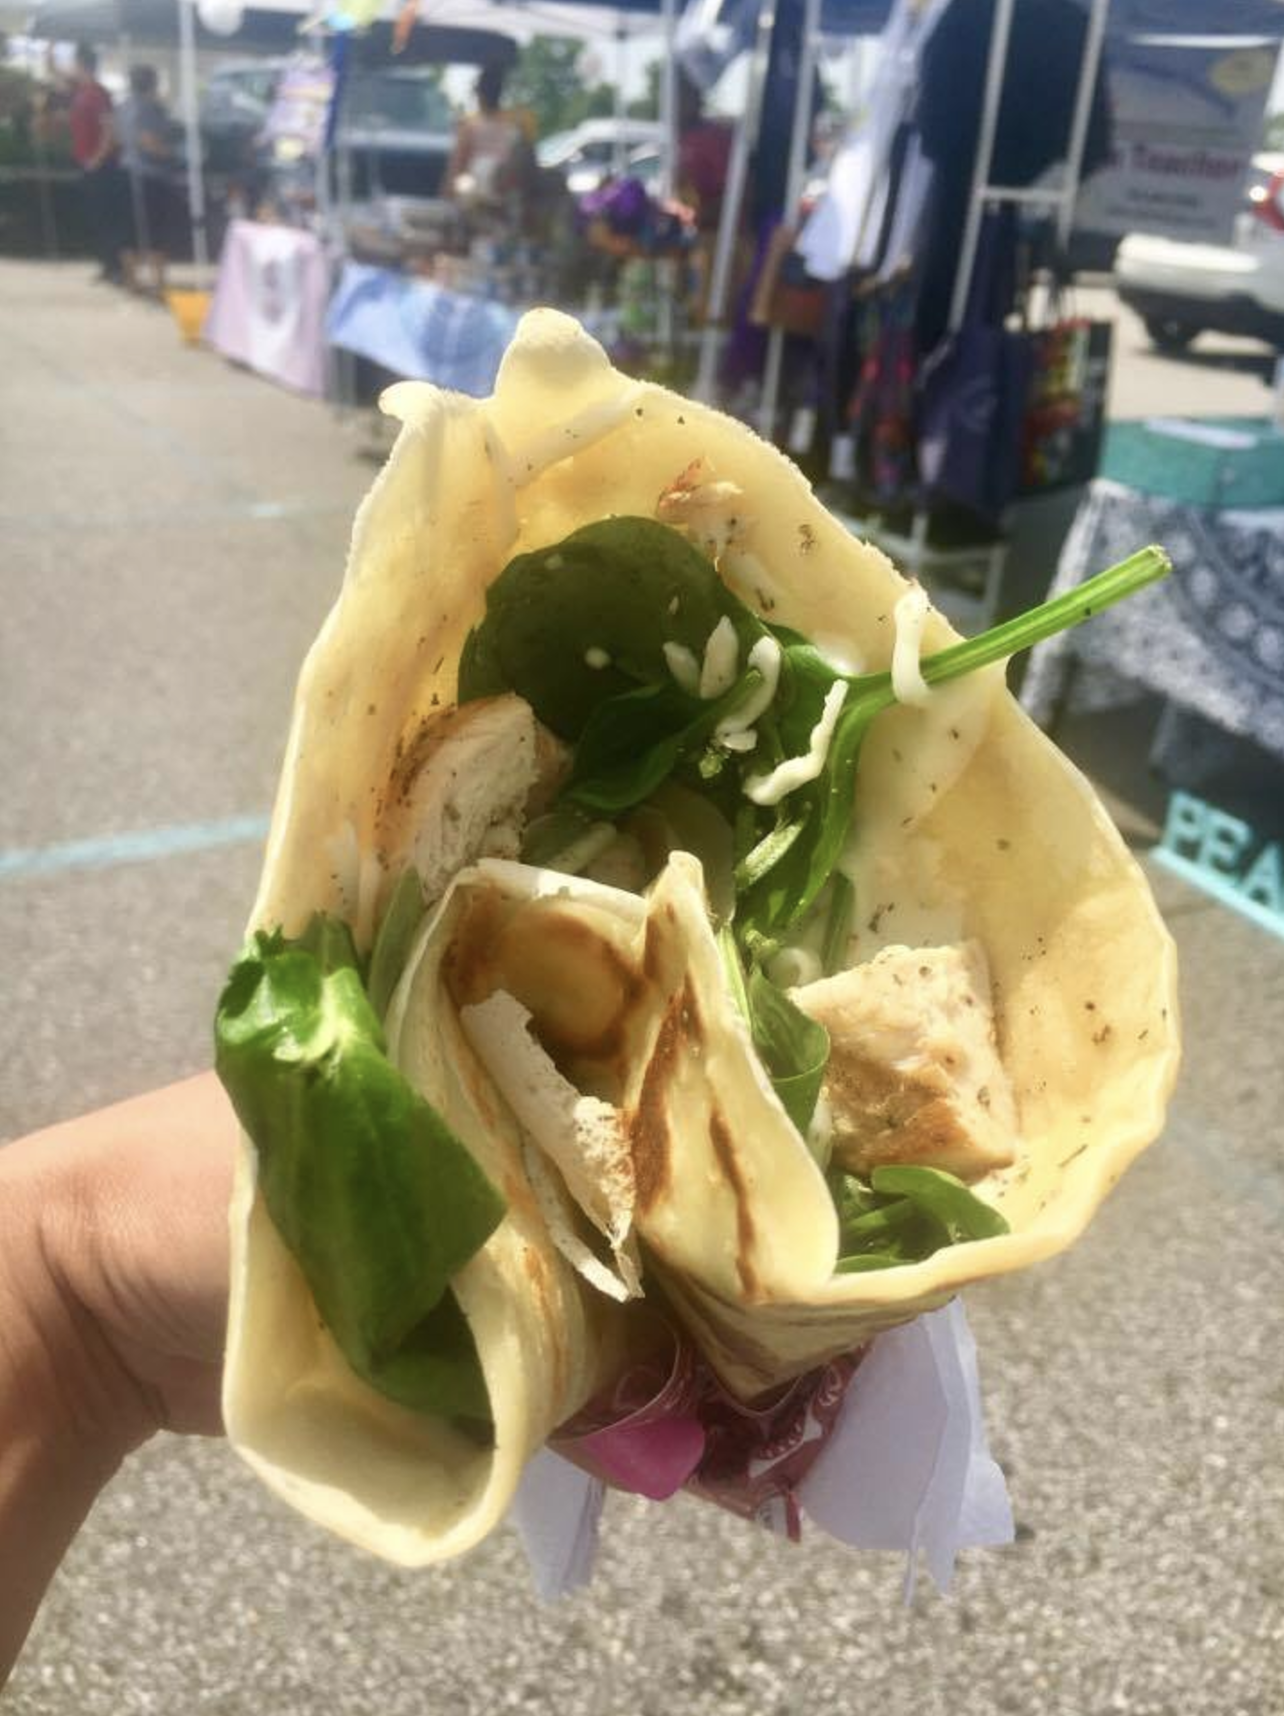 We enjoyed these mouth-watering, freshly-made healthy crepes from Rita's Crepes at "The Market at Potomac Mills" in Woodbridge, Virginia